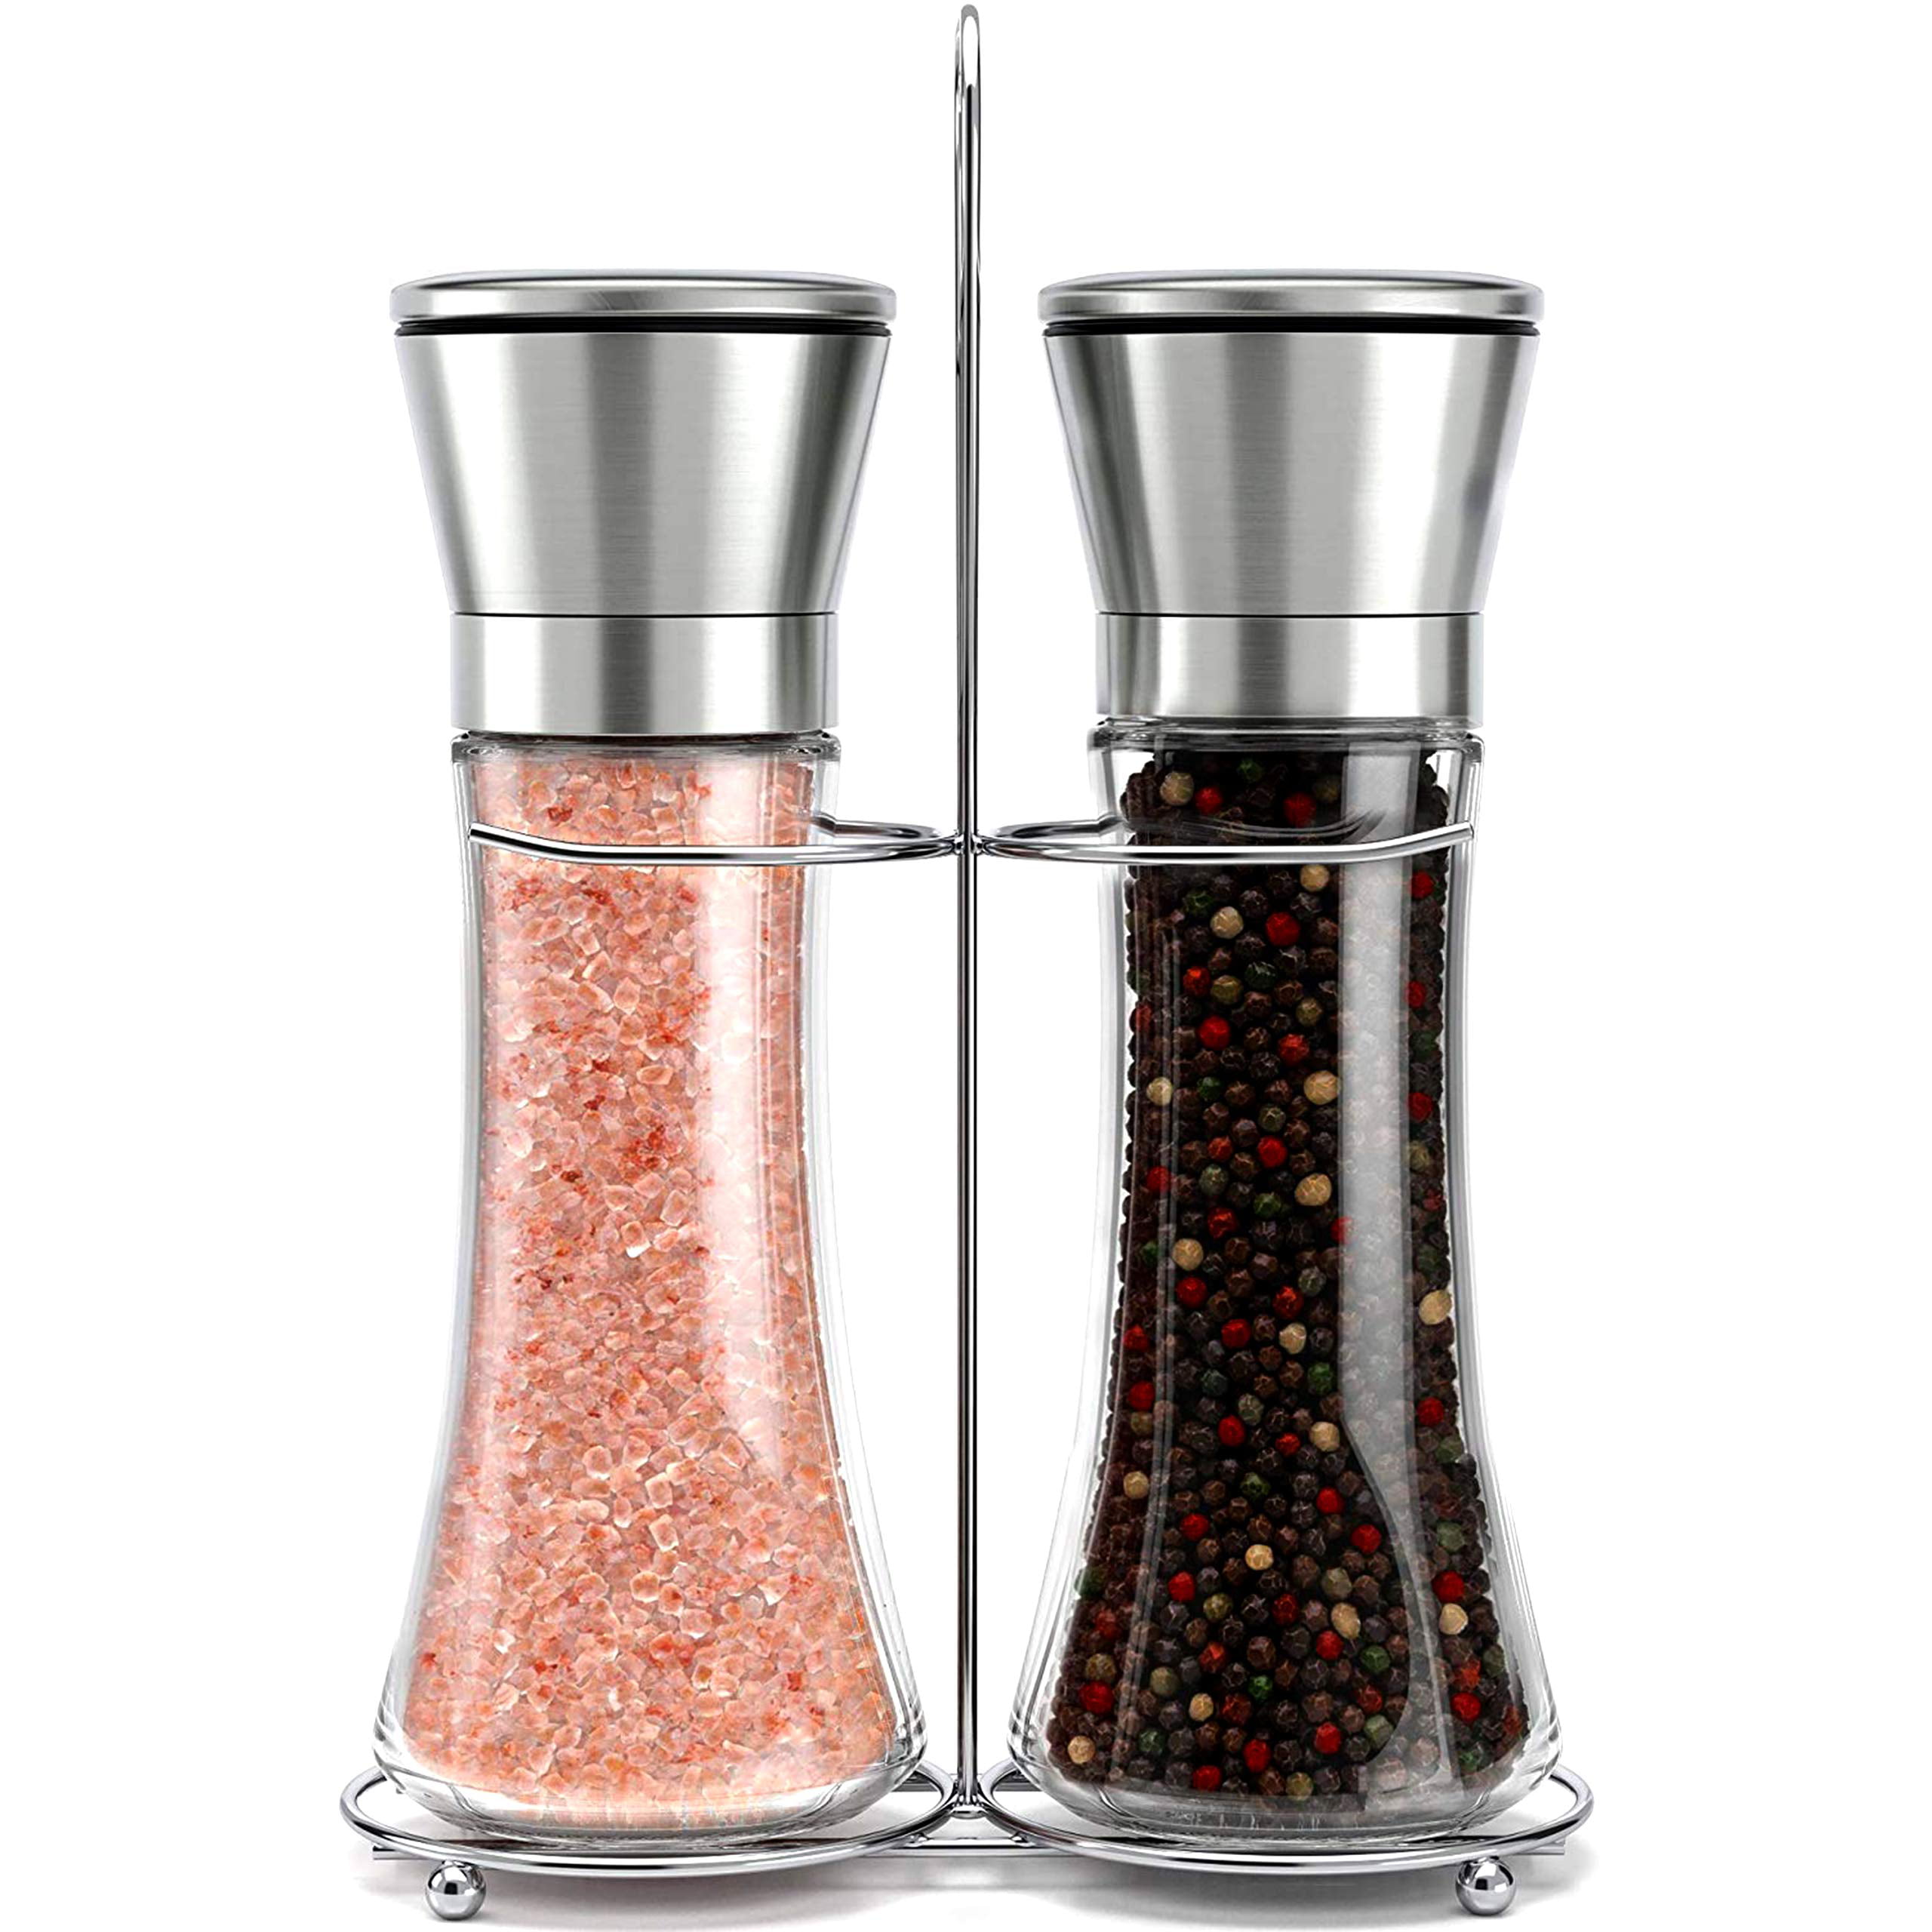 Adjustable Coarseness & Ceramic Mechanism Perfect for Kitchen Salt and Pepper Mill Premium Quality Stainless Steel & Glass Best Salt and Pepper Shakers Salt and Pepper Grinder Set with Stand 